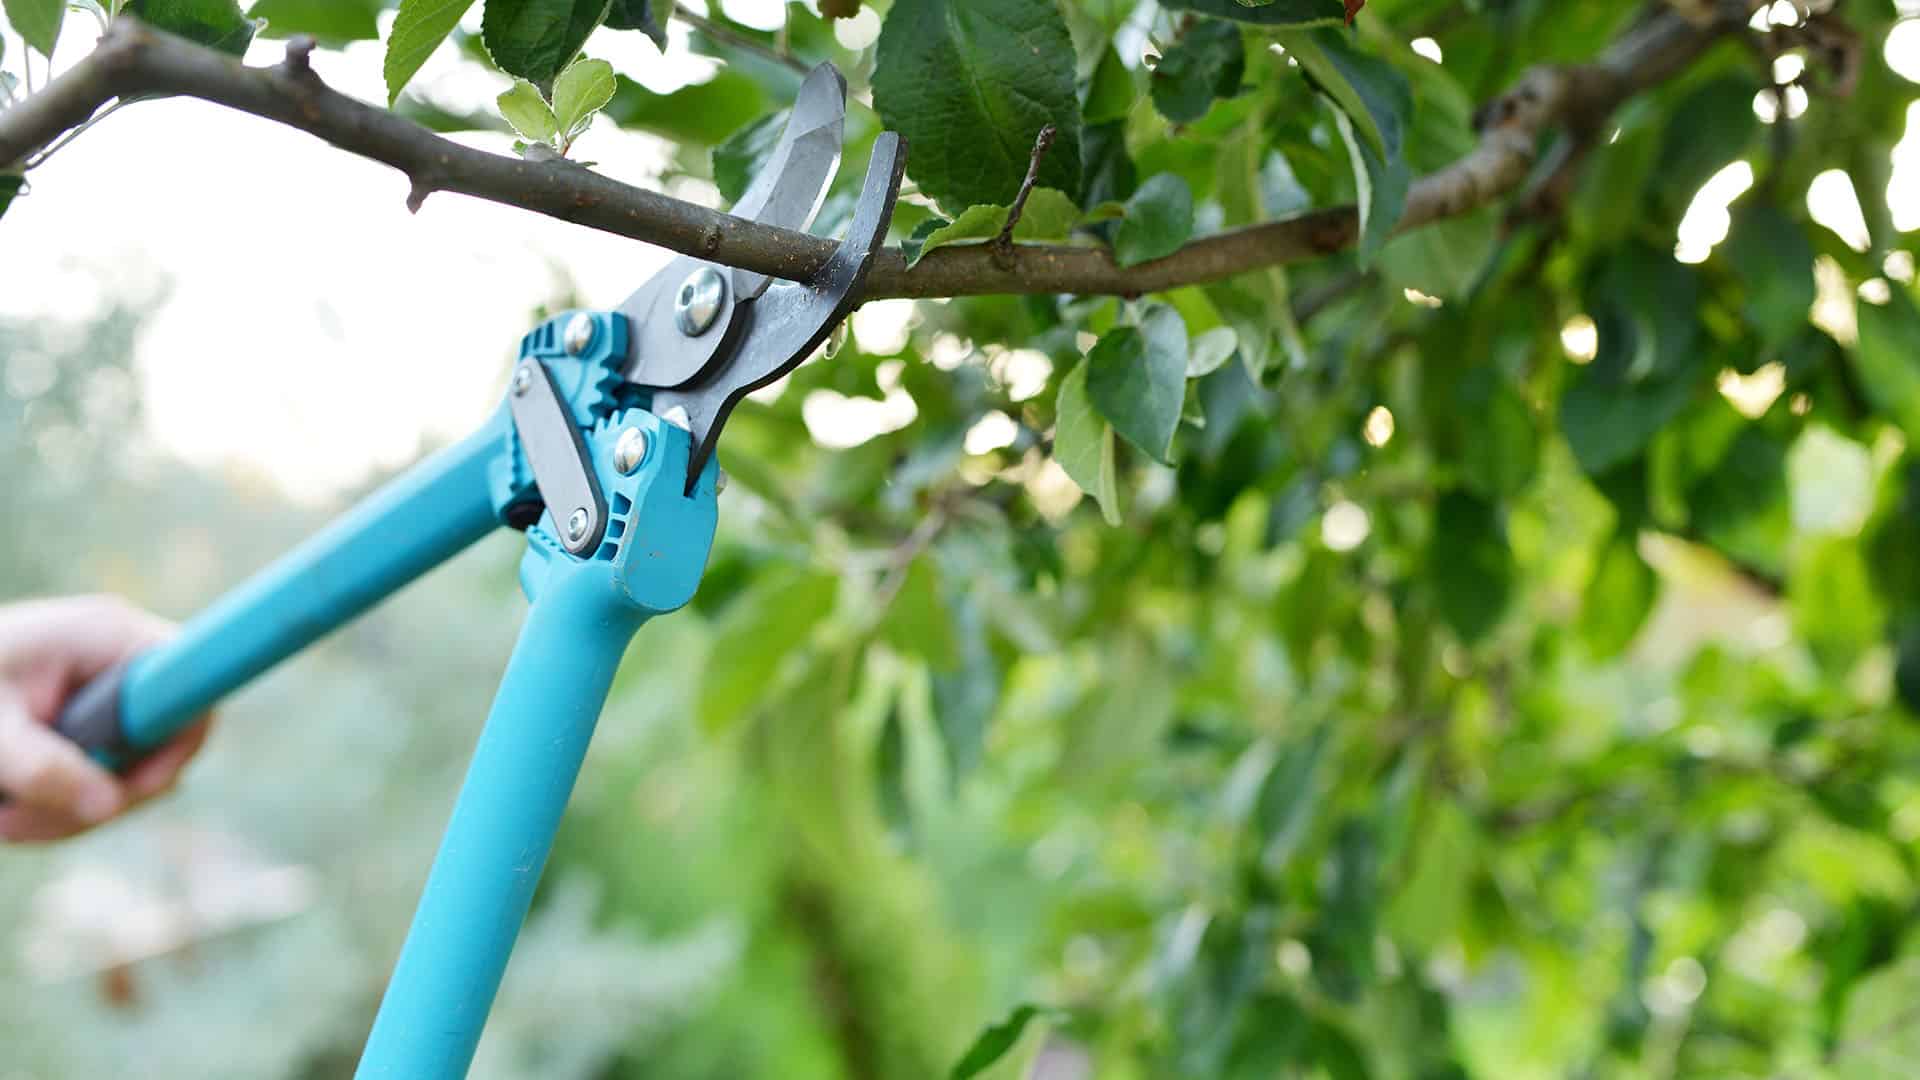 Regular pruning of trees is also part of rural property maintenance.